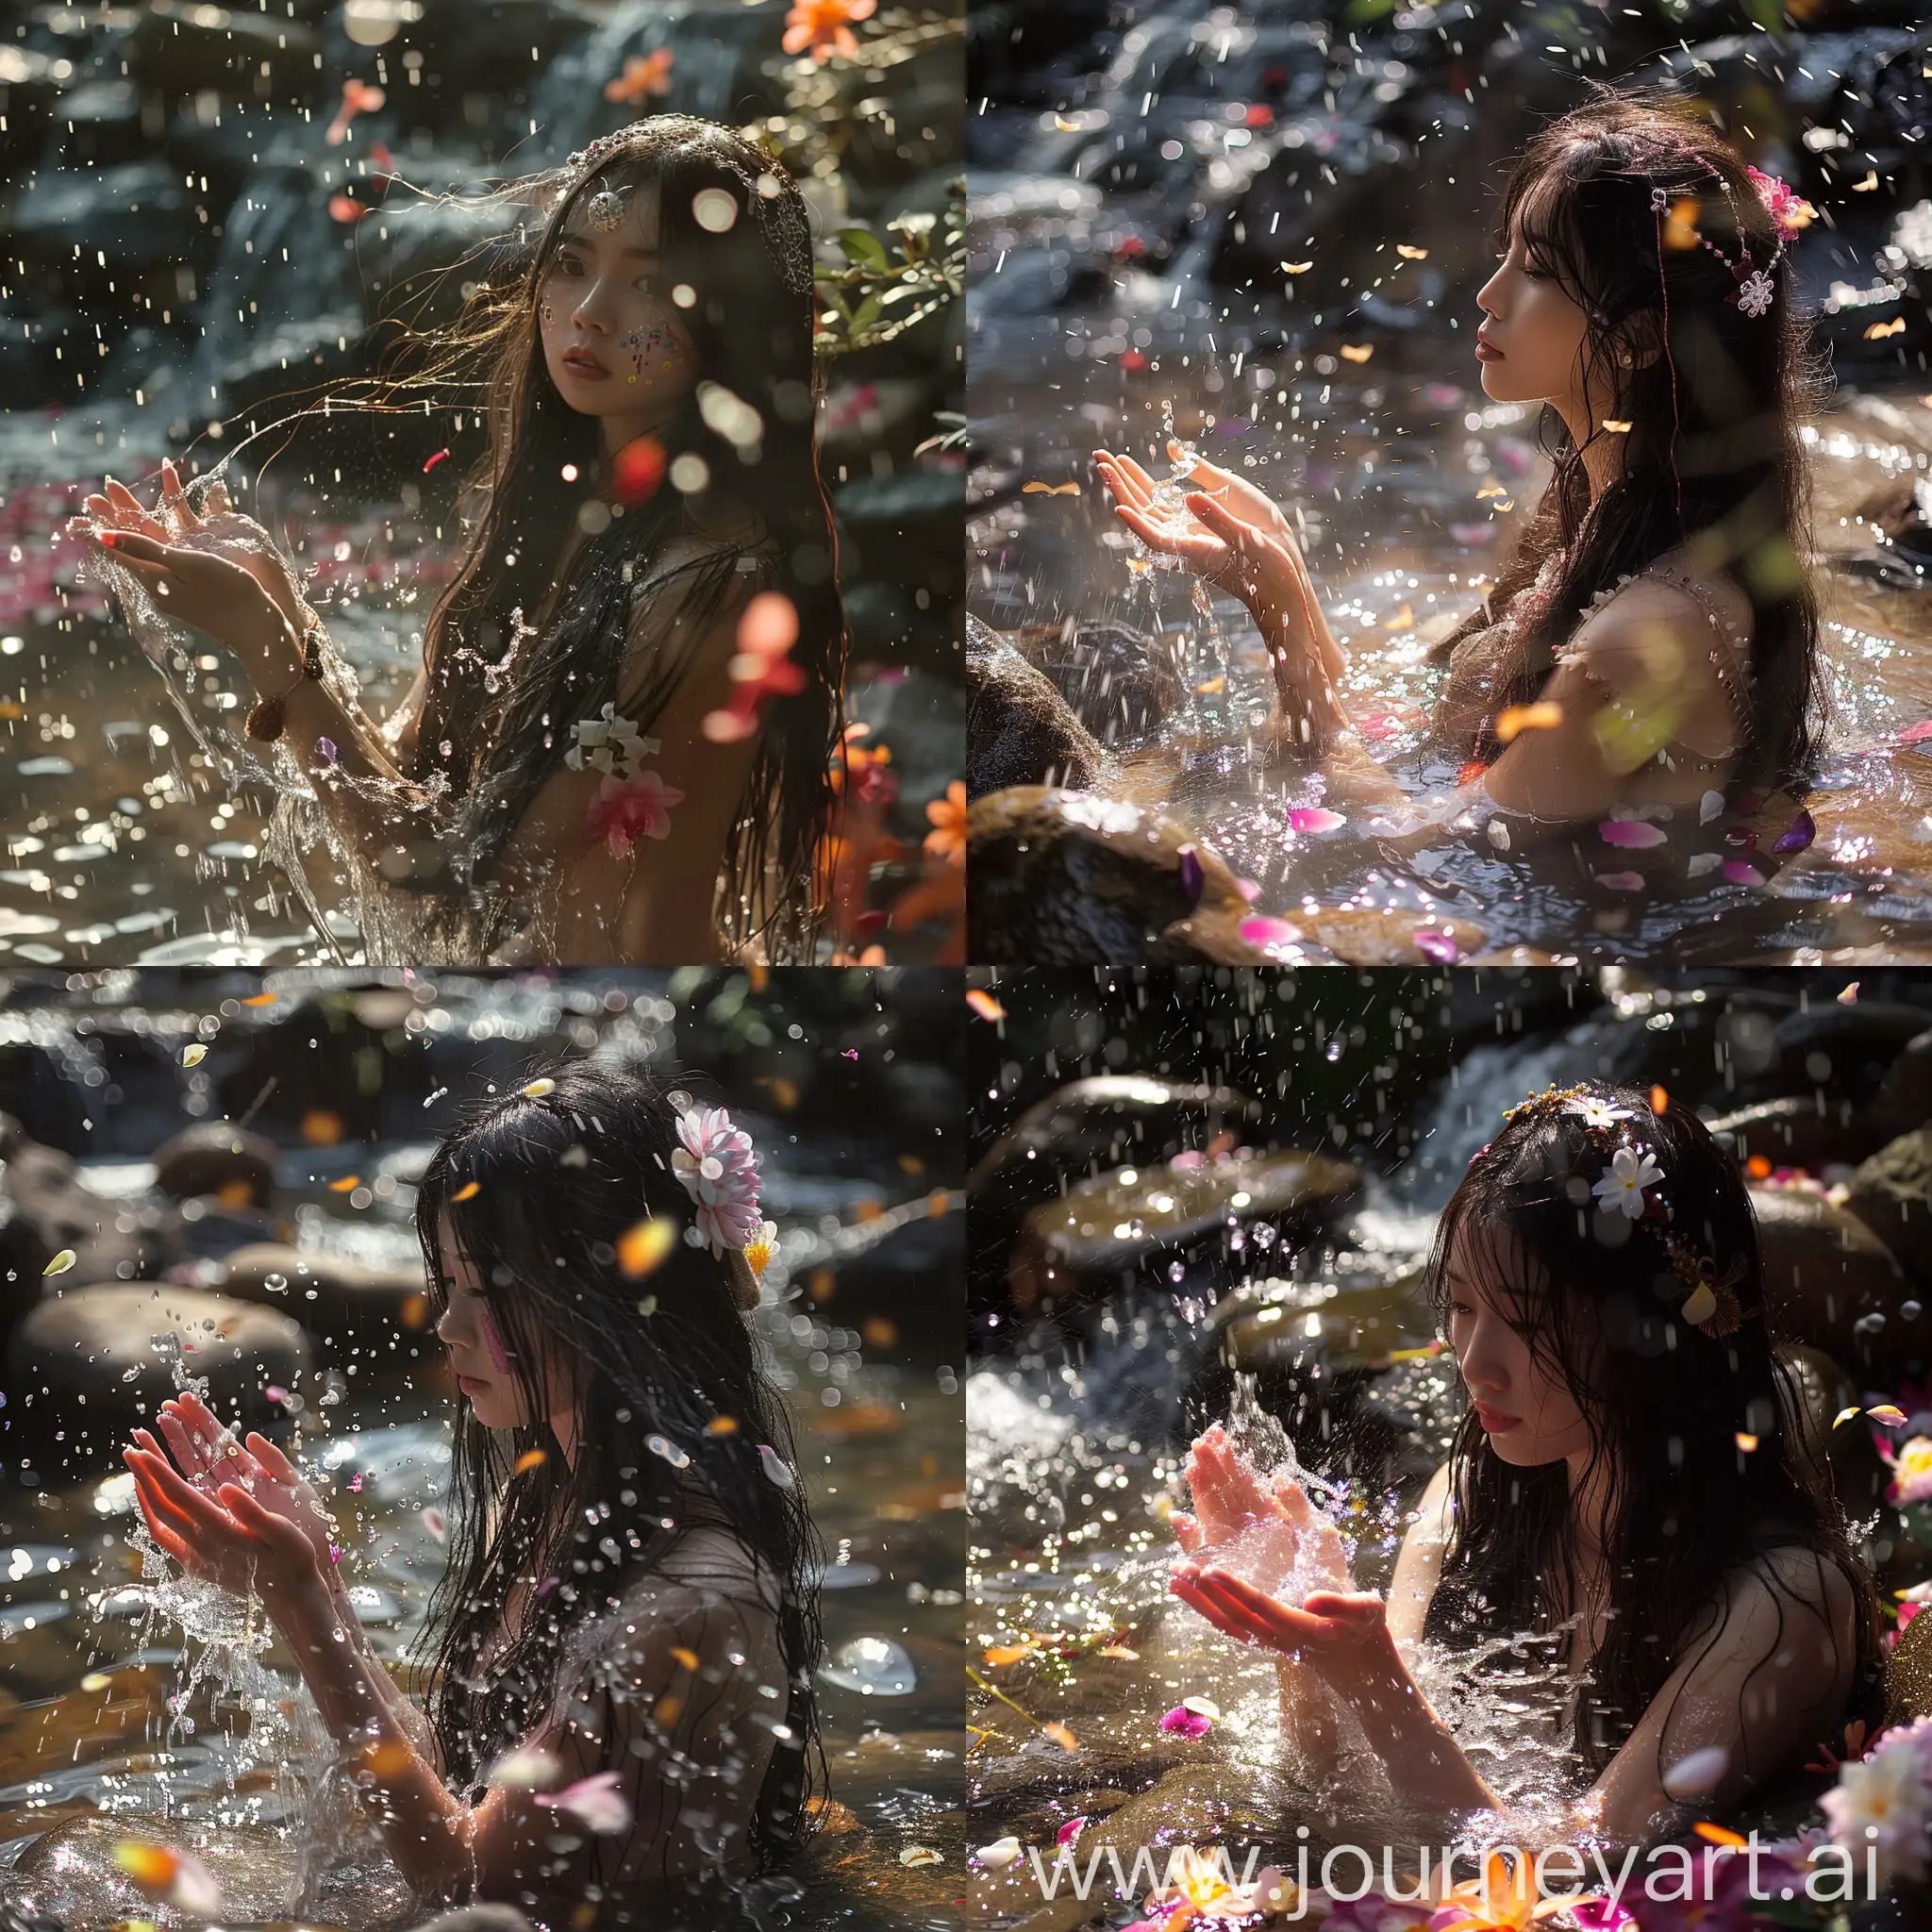 Real photos, sun and rain, (or moonlight), a Taiwanese beauty with long flowing hair in Yexi Hot Spring, a secret place in Yexi, with decorations on her hands, rocks, rain, water splashing from the waterfall, surrounded by flowers, in full bloom, with petals floating in the air , the water is covered with petals, fireflies, bees, rainy weather, wet hair, wet body effect, backlighting, clear face, close-up, depth of field effect, high-speed shutter shooting.